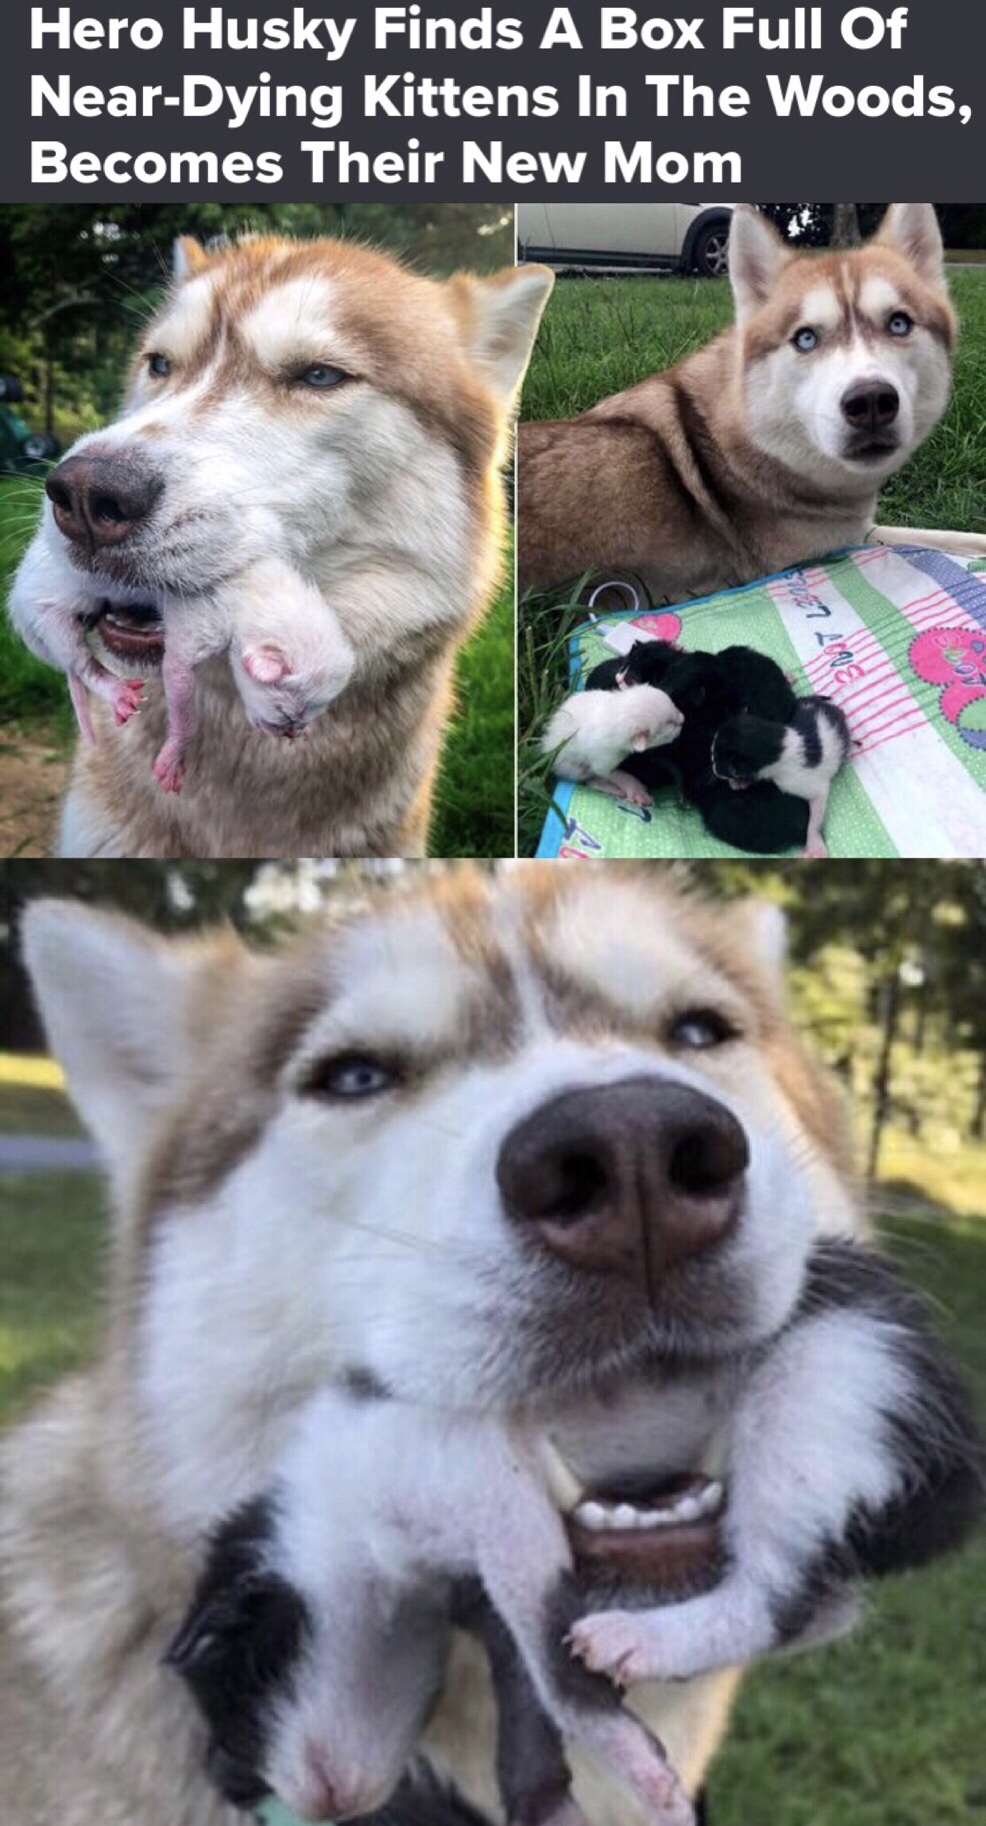 husky with something in its mouth - Hero Husky Finds A Box Full Of NearDying Kittens In The Woods, Becomes Their New Mom